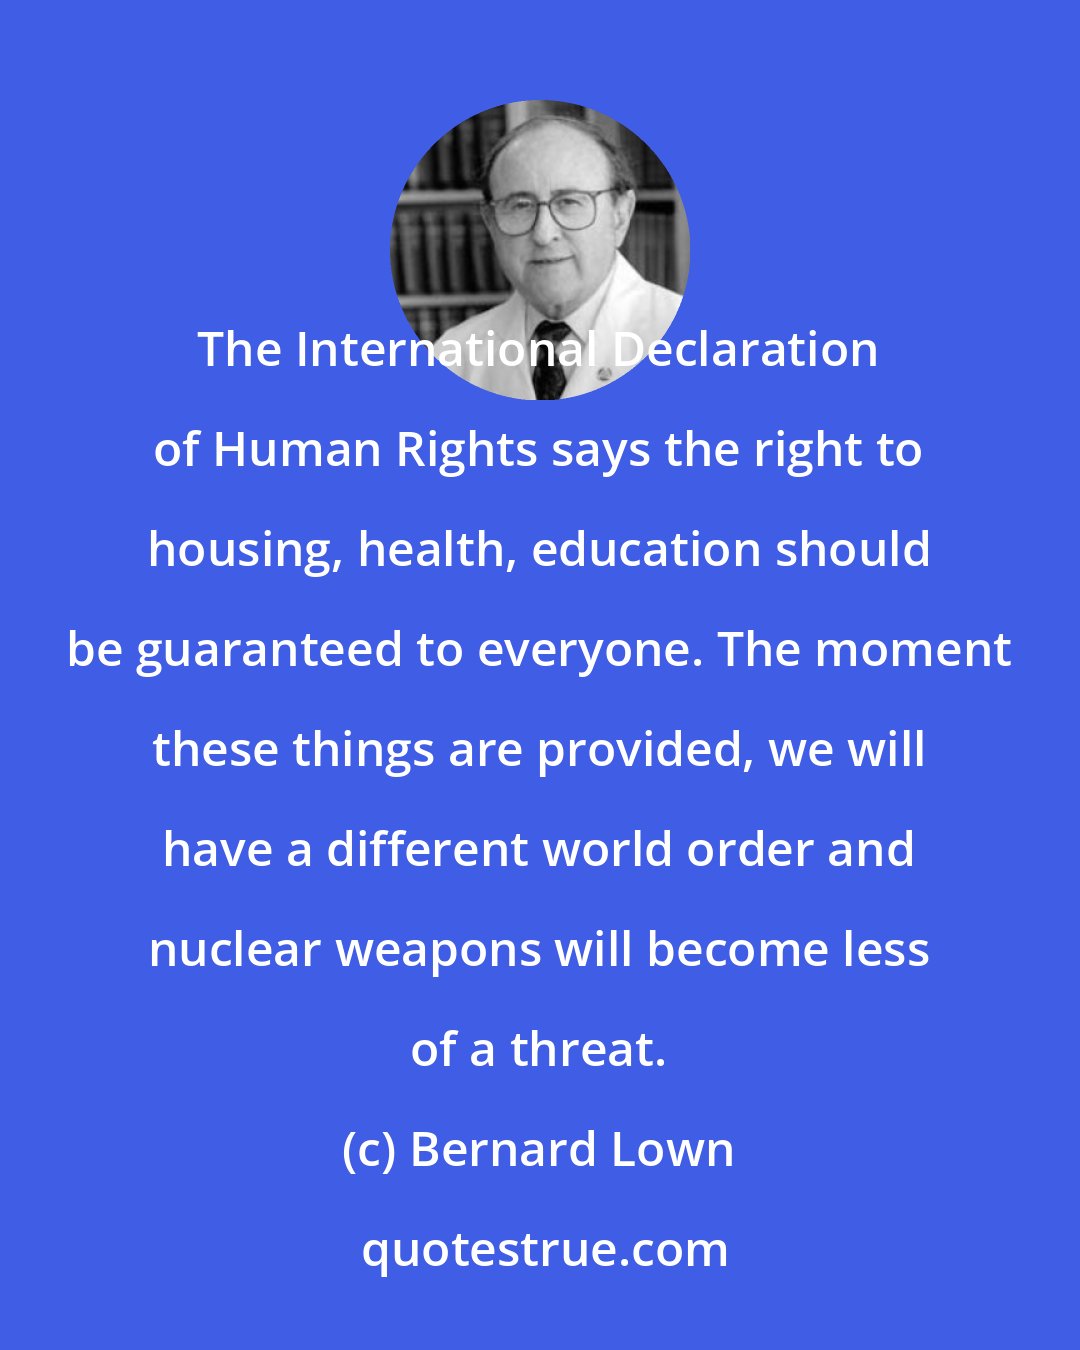 Bernard Lown: The International Declaration of Human Rights says the right to housing, health, education should be guaranteed to everyone. The moment these things are provided, we will have a different world order and nuclear weapons will become less of a threat.